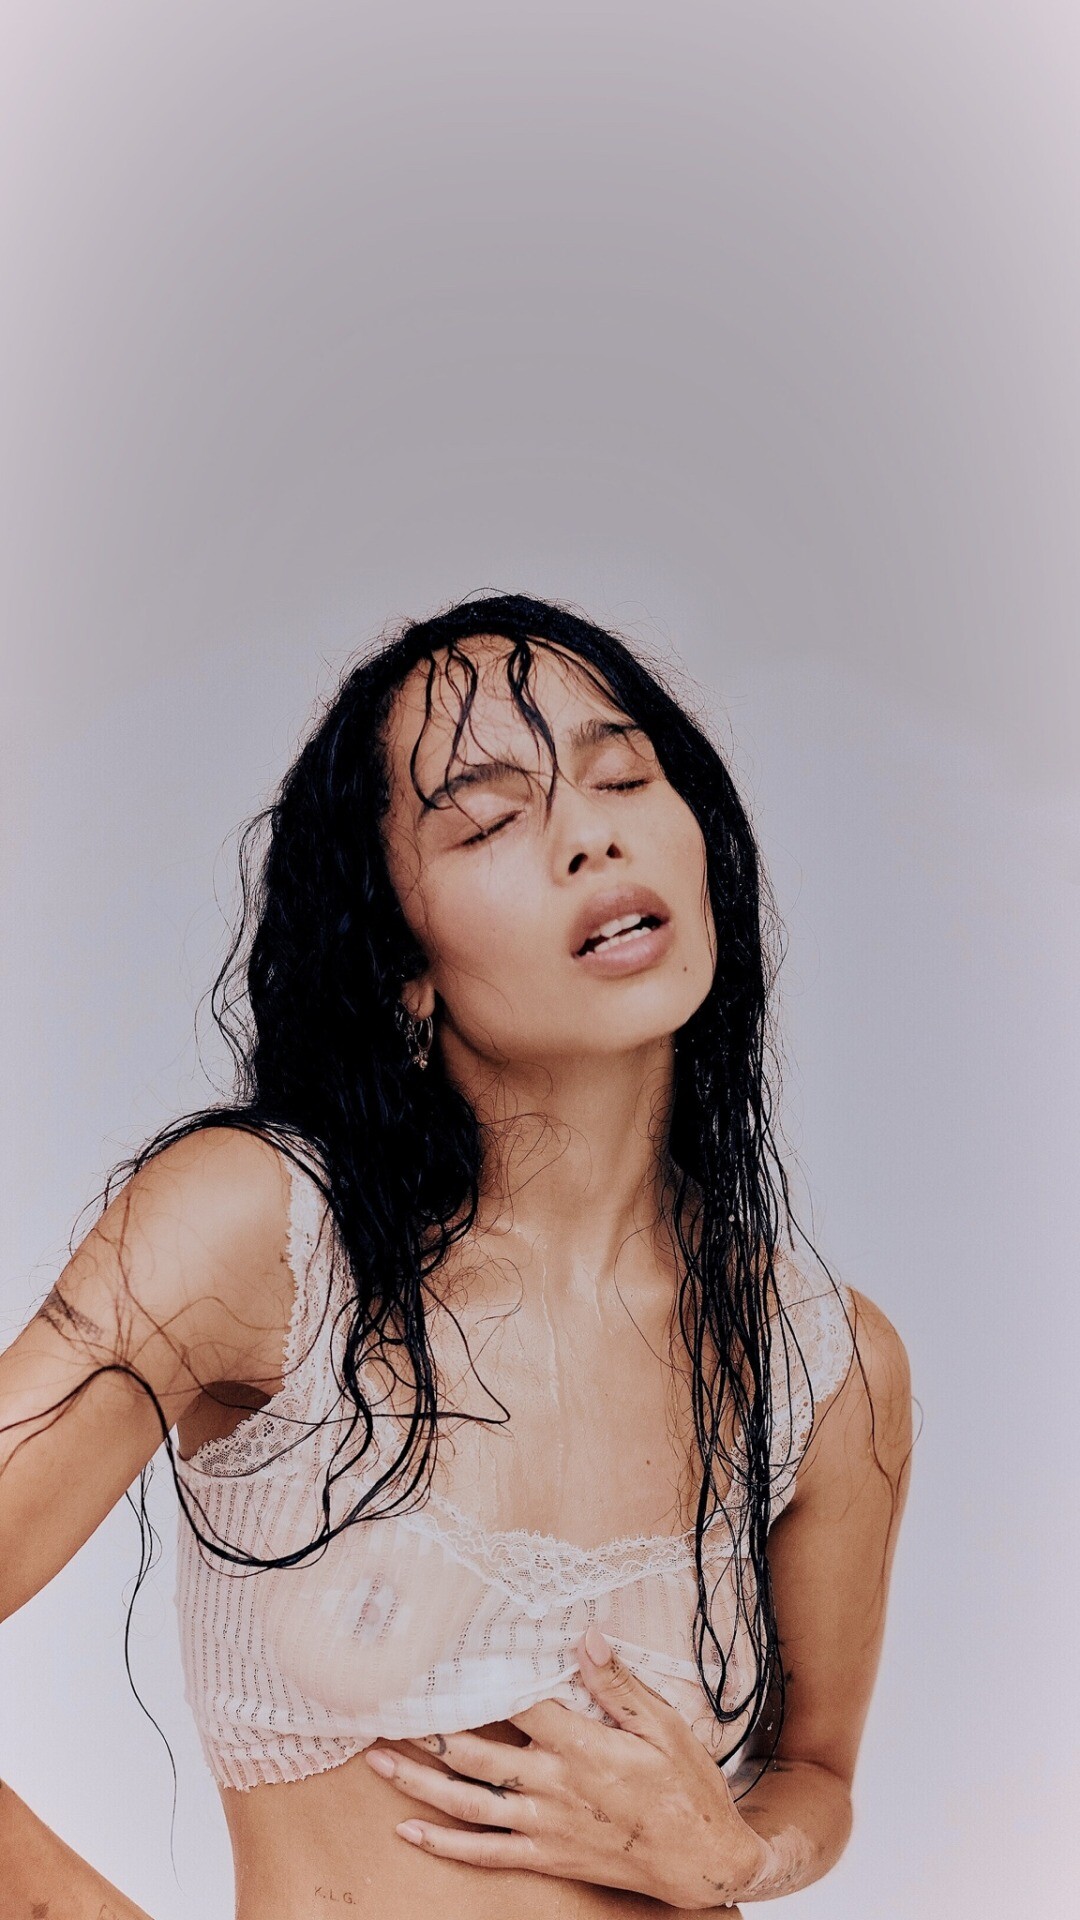 Zoe Kravitz: An American actress, singer and model, who is known for films, such as No Reservations and X:Men: First Class. 1080x1920 Full HD Wallpaper.